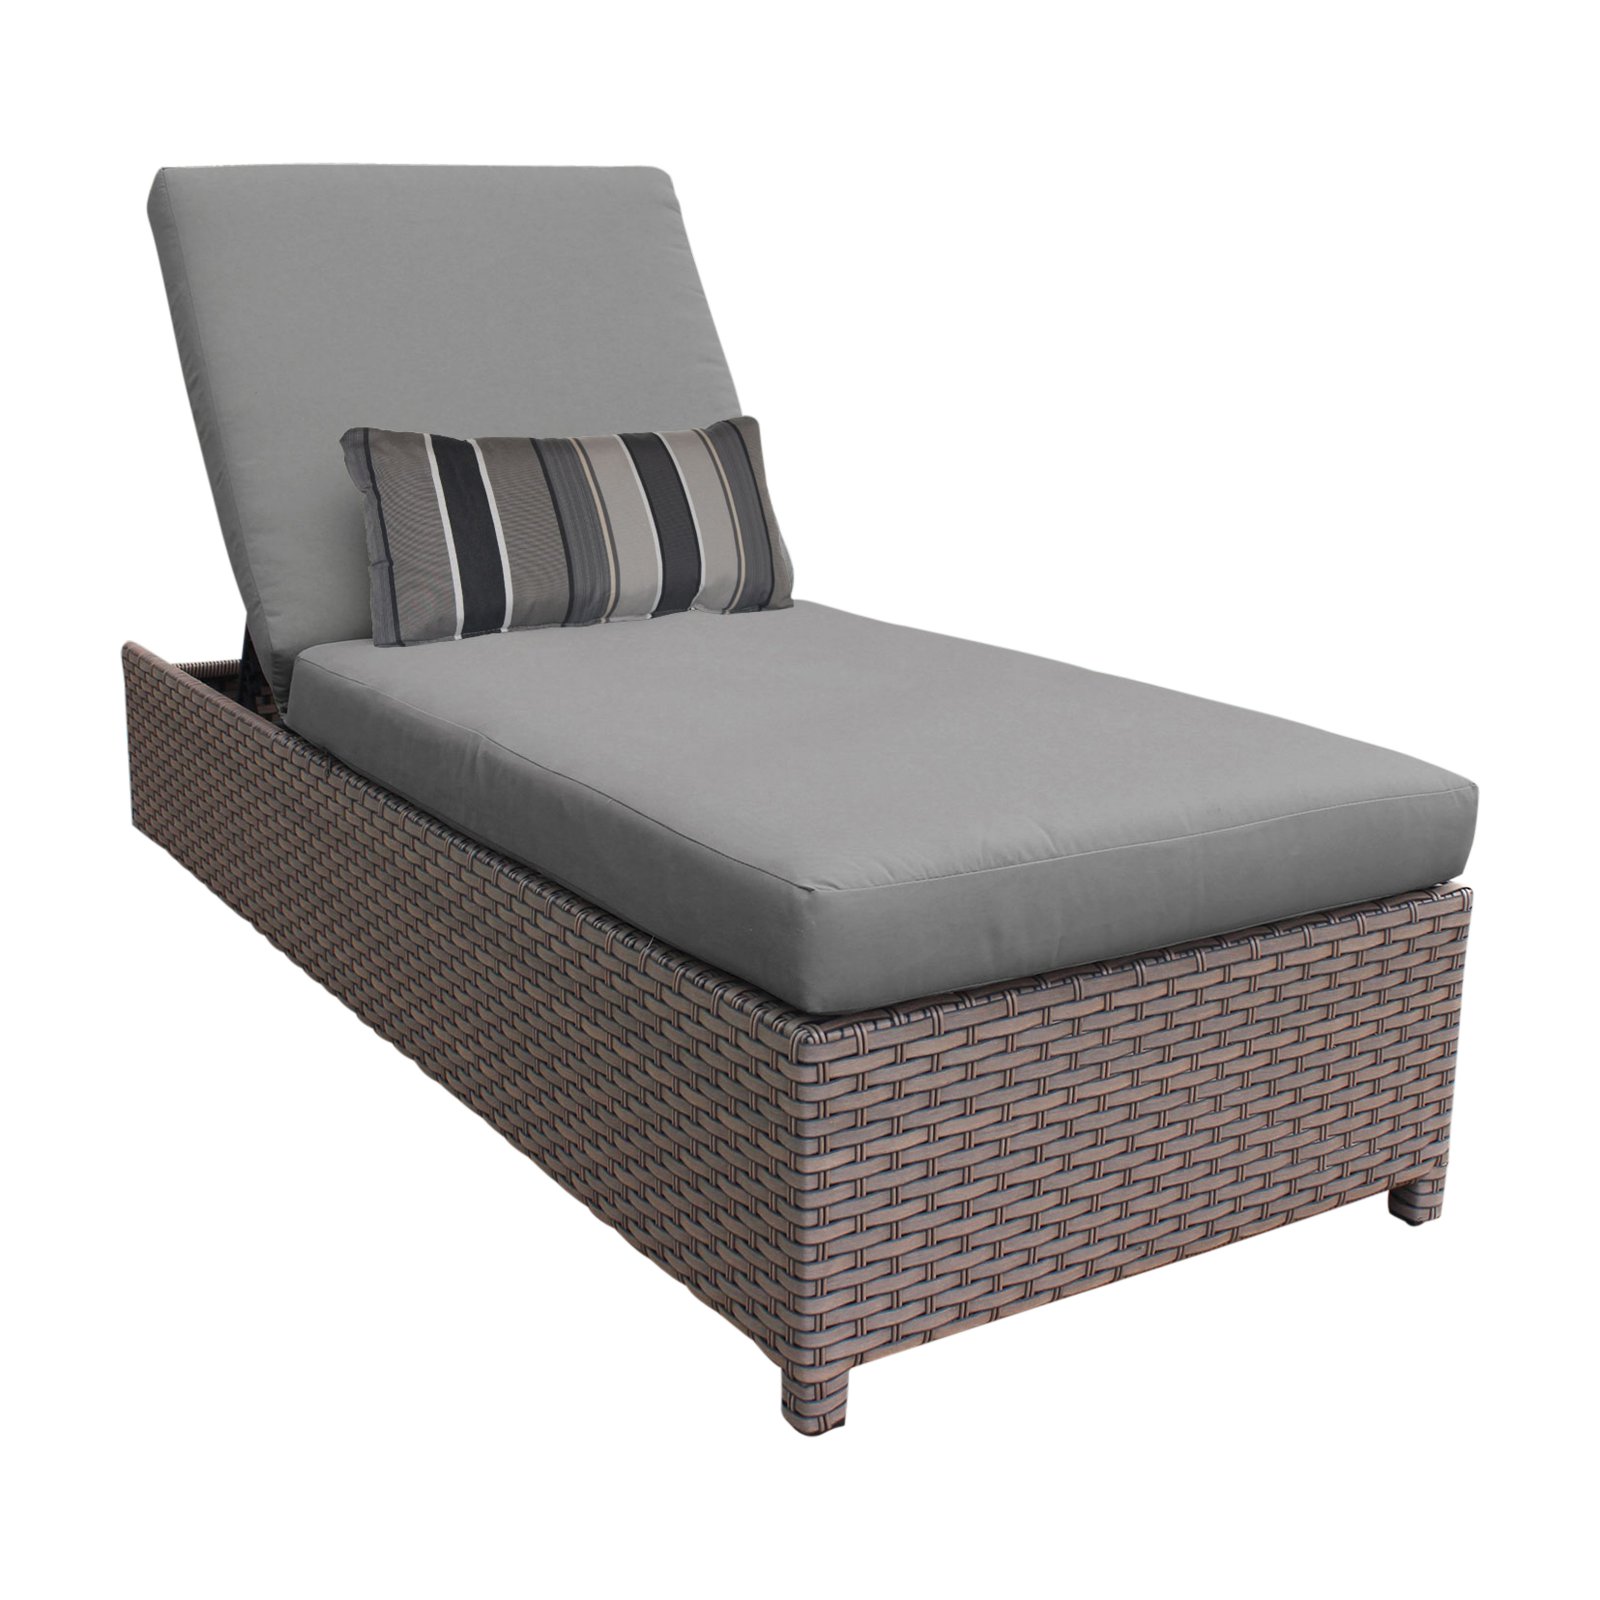 TK Classics Monterey Wheeled Wicker Outdoor Chaise Lounge Chair - image 2 of 11